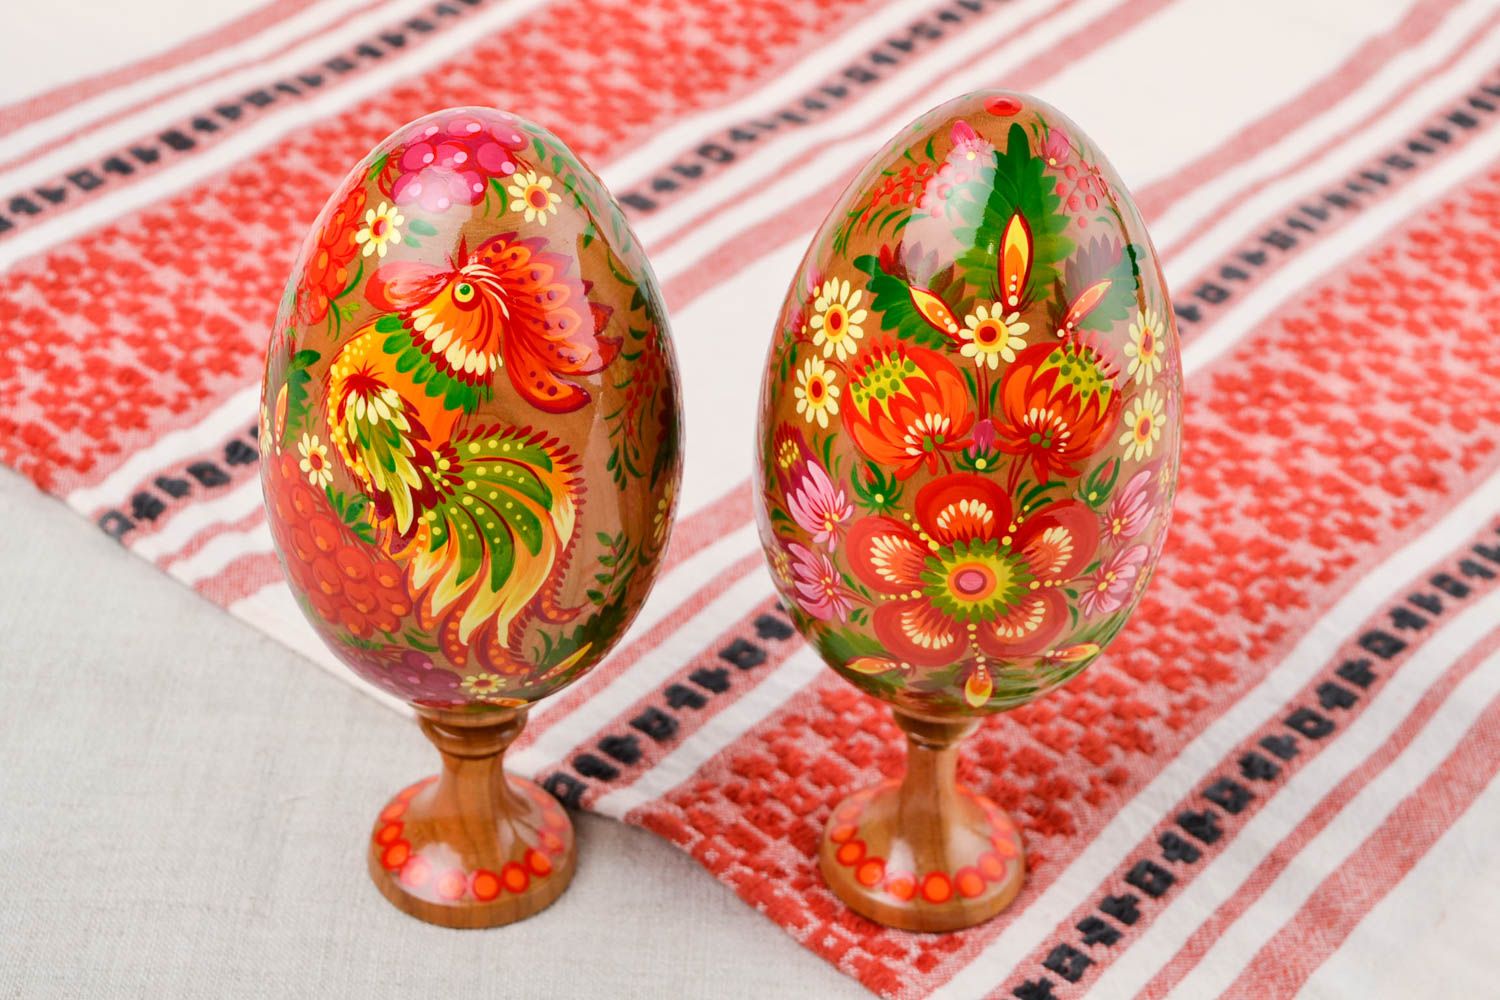 Handmade Easter eggs 2 pieces cool rooms Easter gift ideas decorative use only photo 1